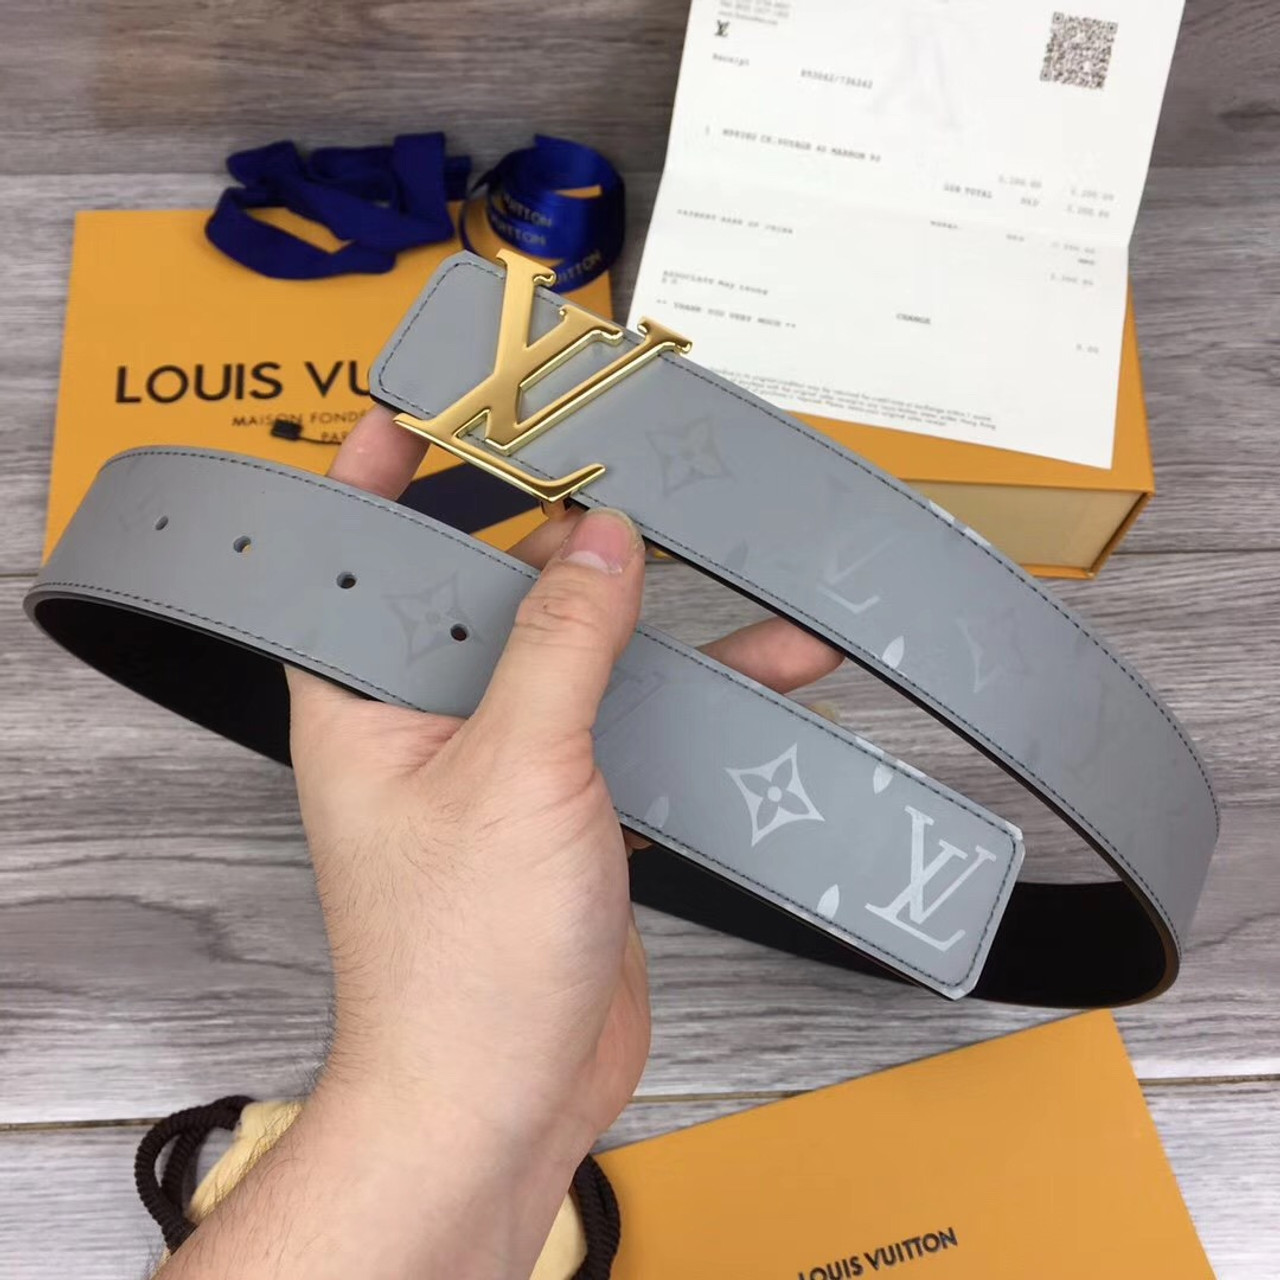 where to buy the best stockX High quality replica UA Vuitton Monogram belt 2019 virgil abloh (pick color) Hypedripz is the high quality trusted clone replica fake designer hypebeast seller